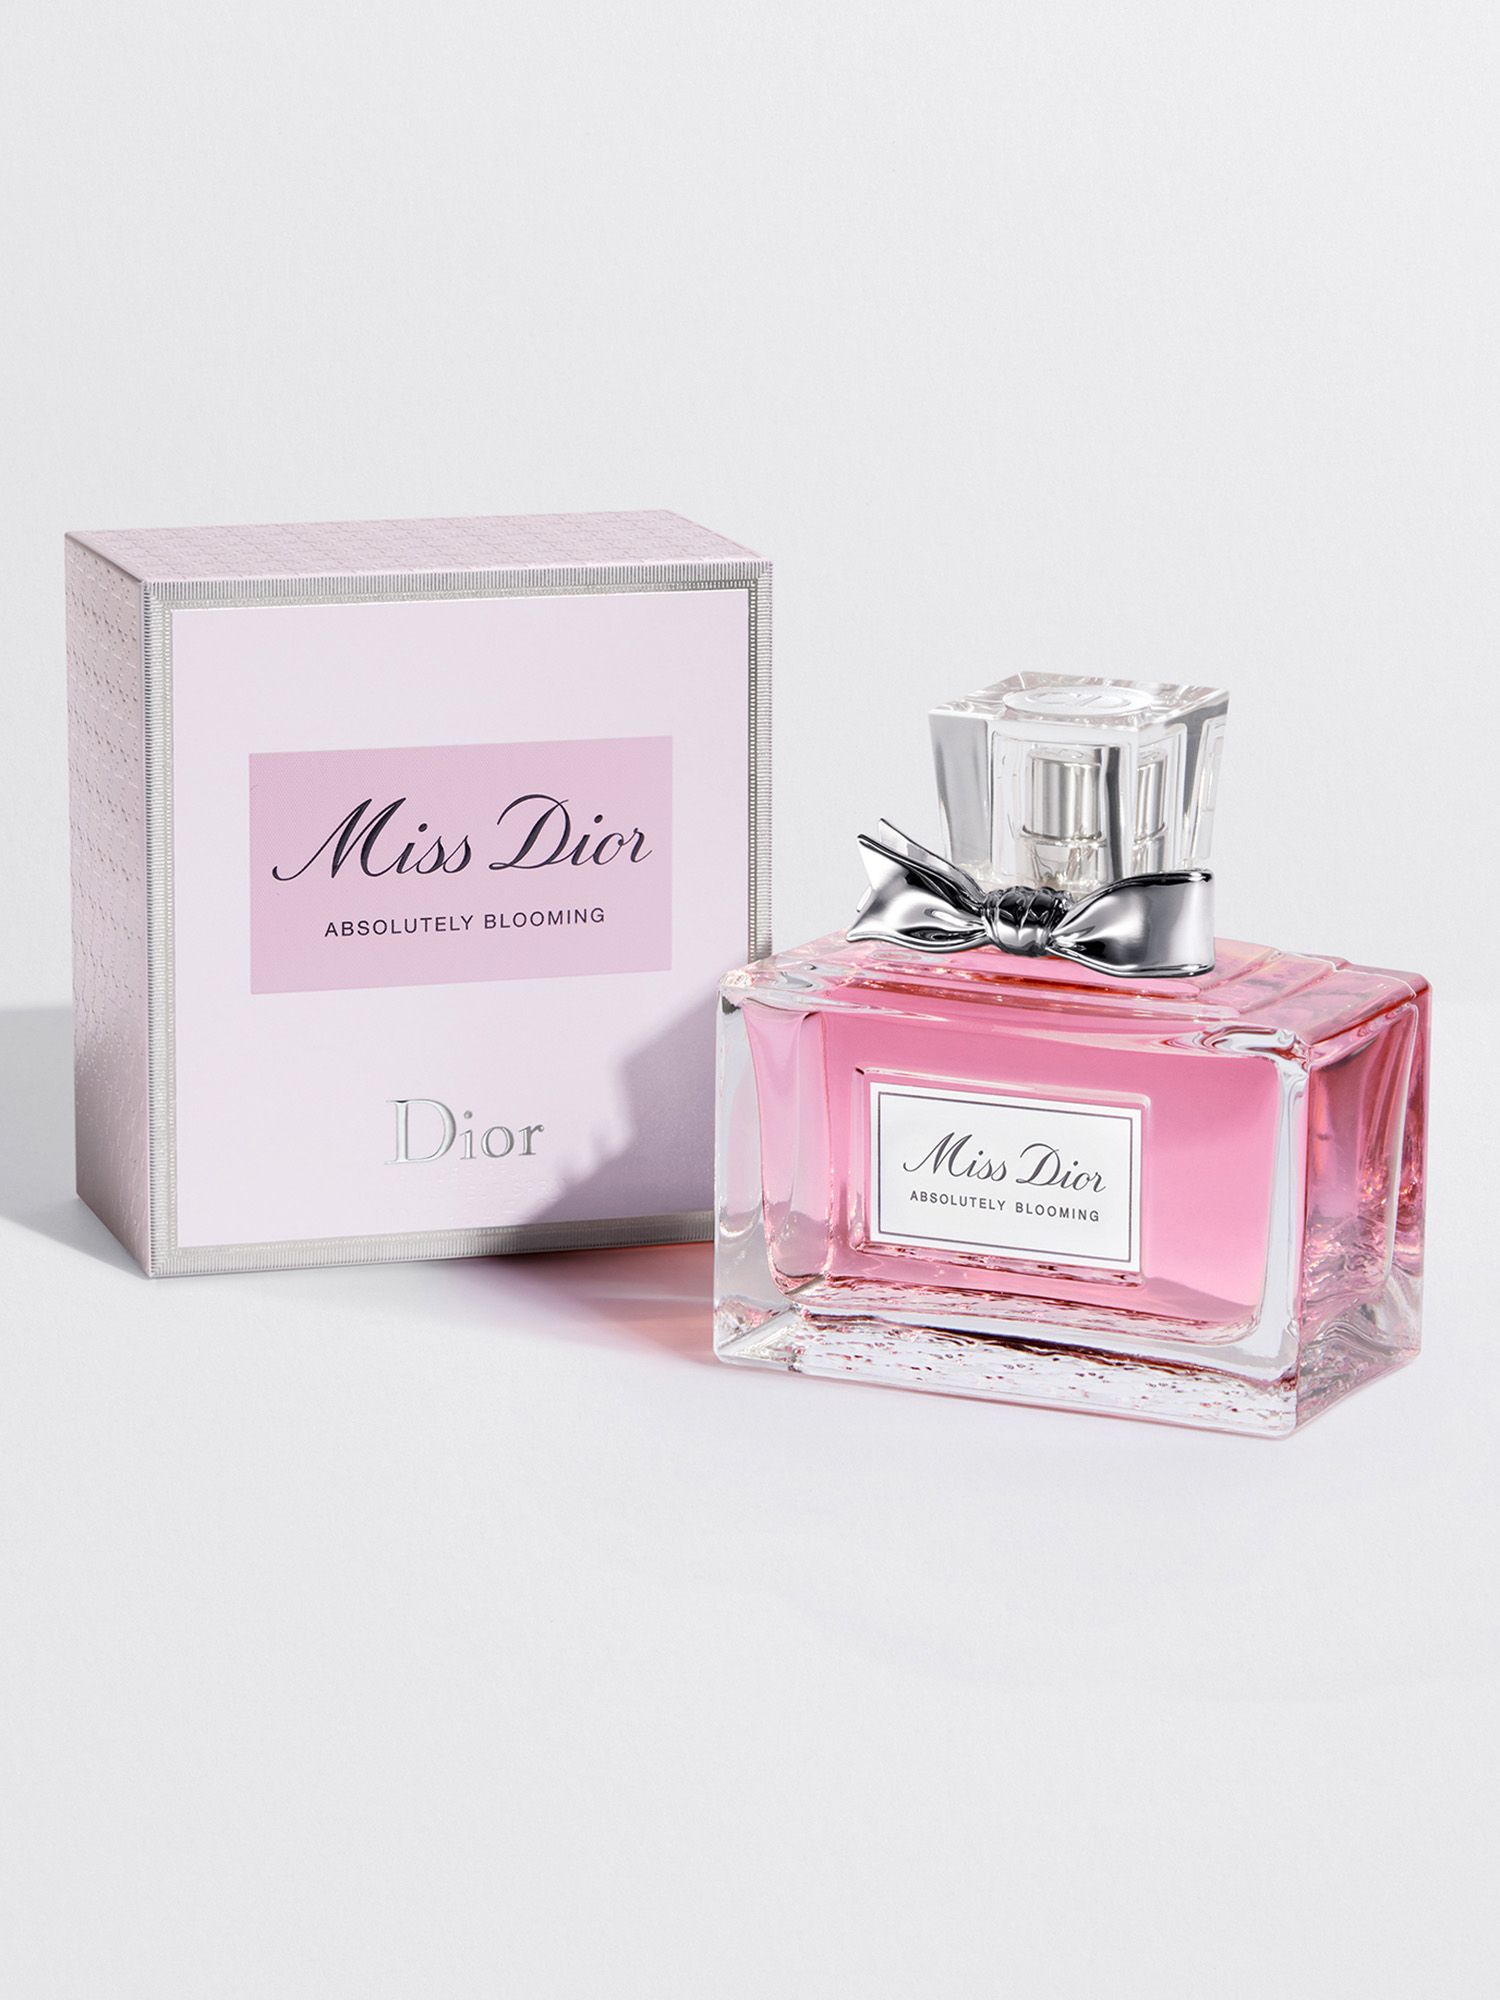 miss dior absolutely blooming price